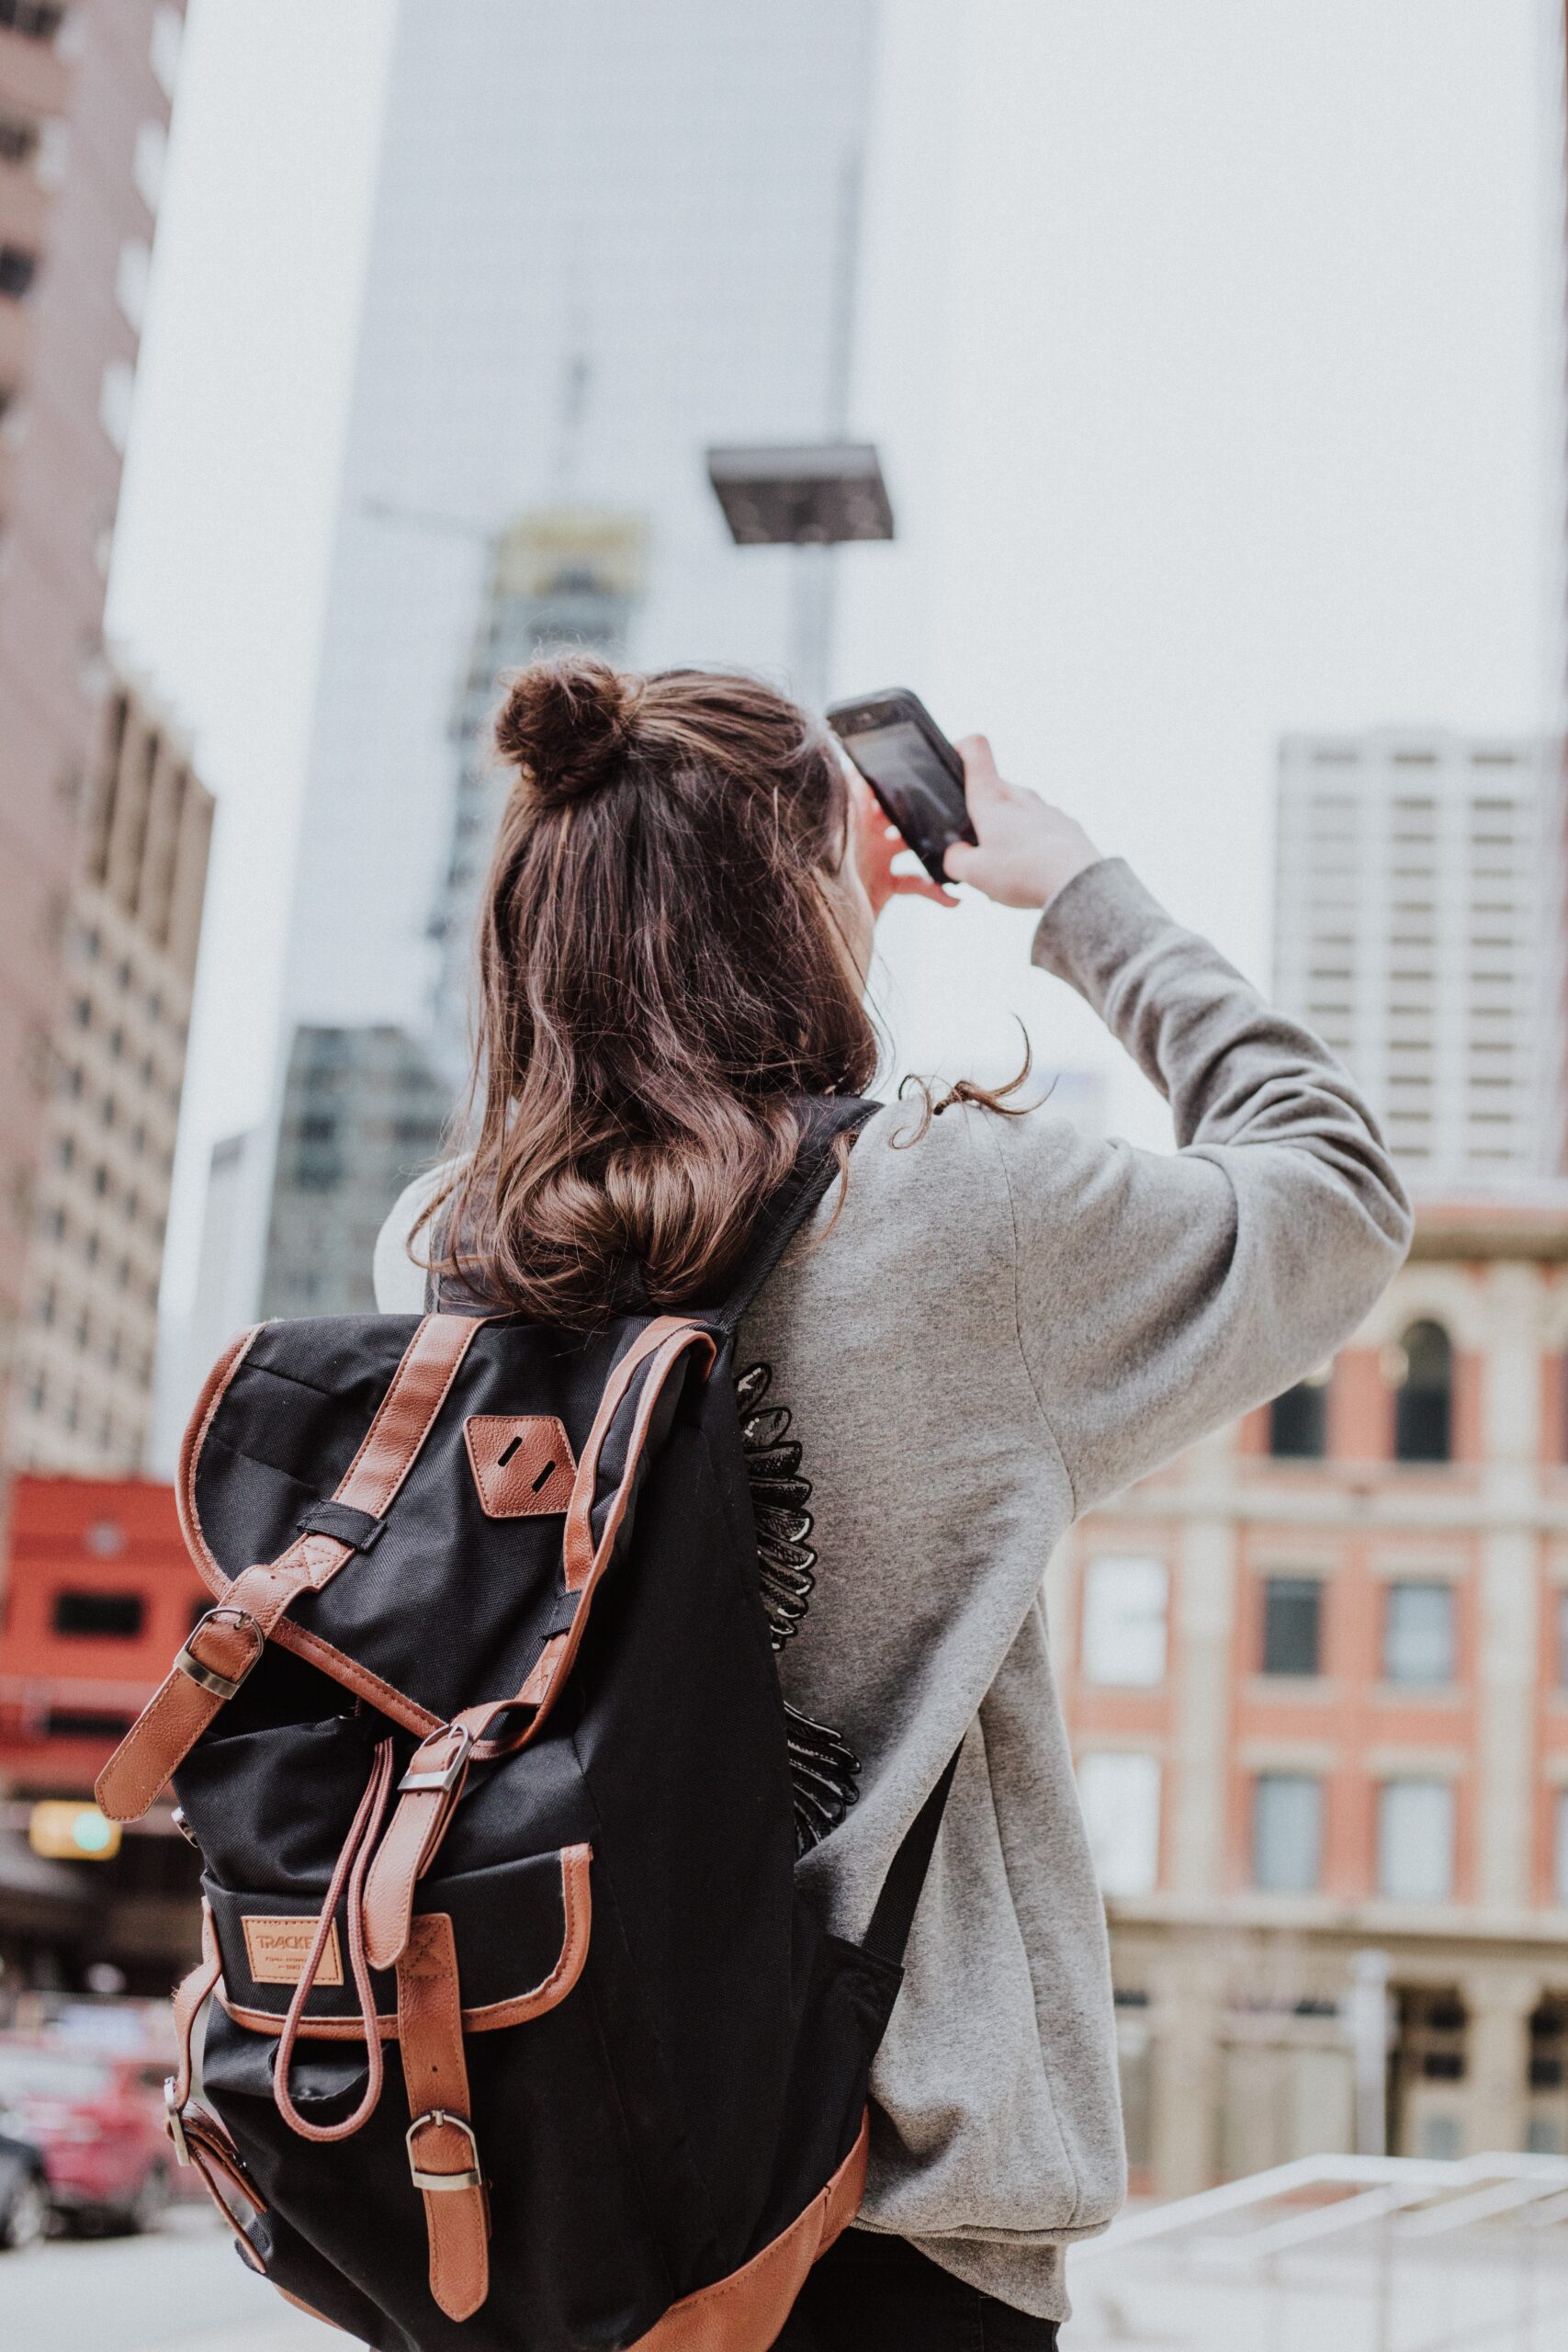 woman used her phone to take photos of the buildings in a city wearing a backpack and a grey sweatshirt